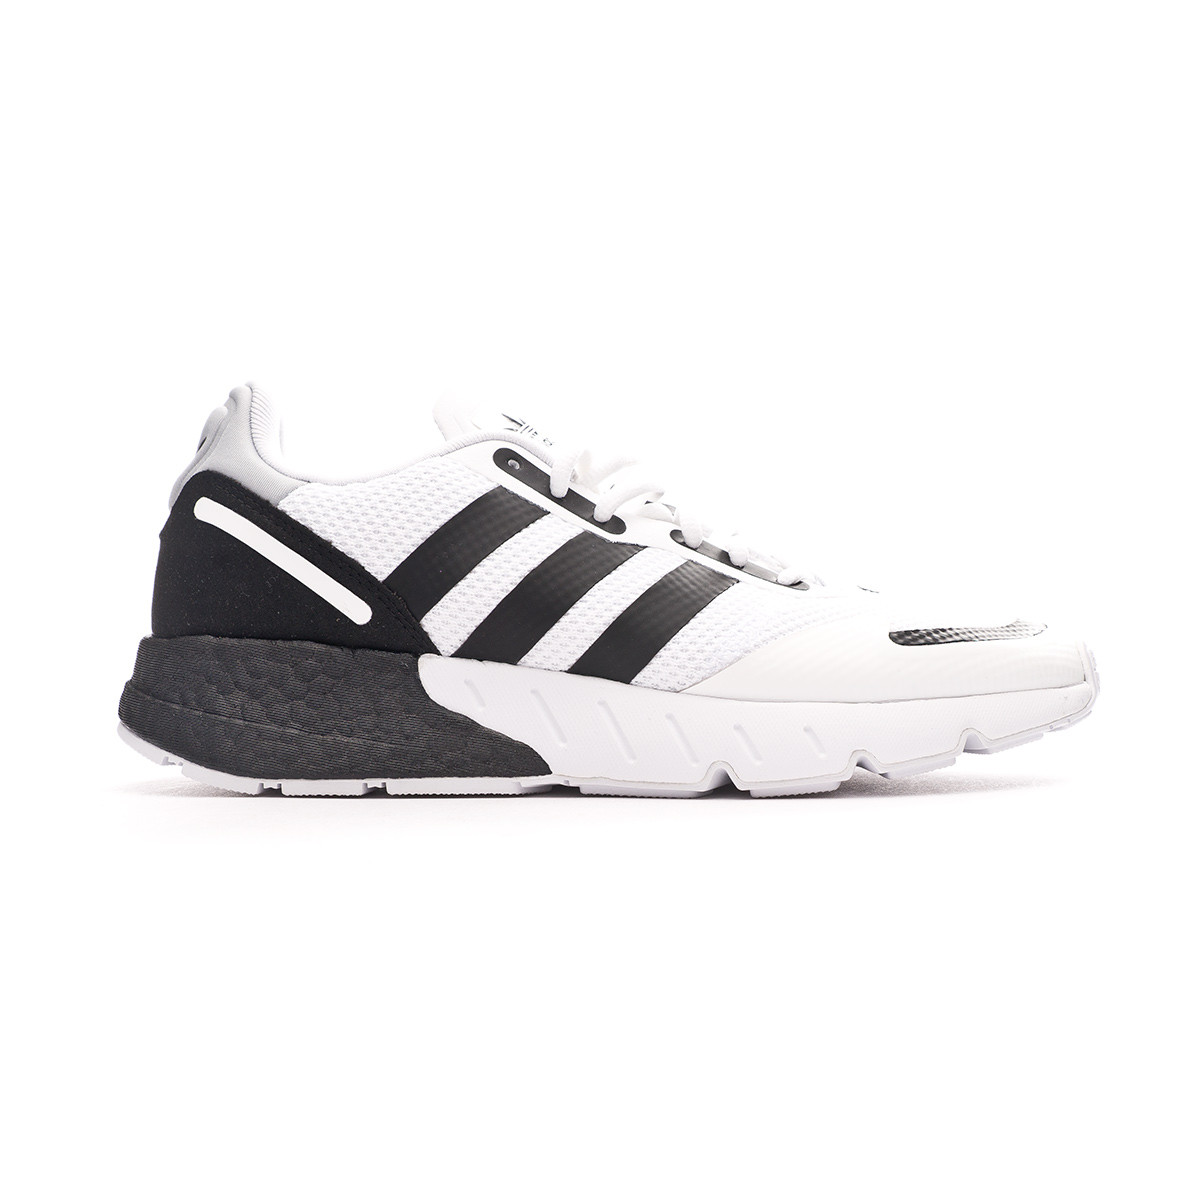 adidas ZX 1K Boost Trainers